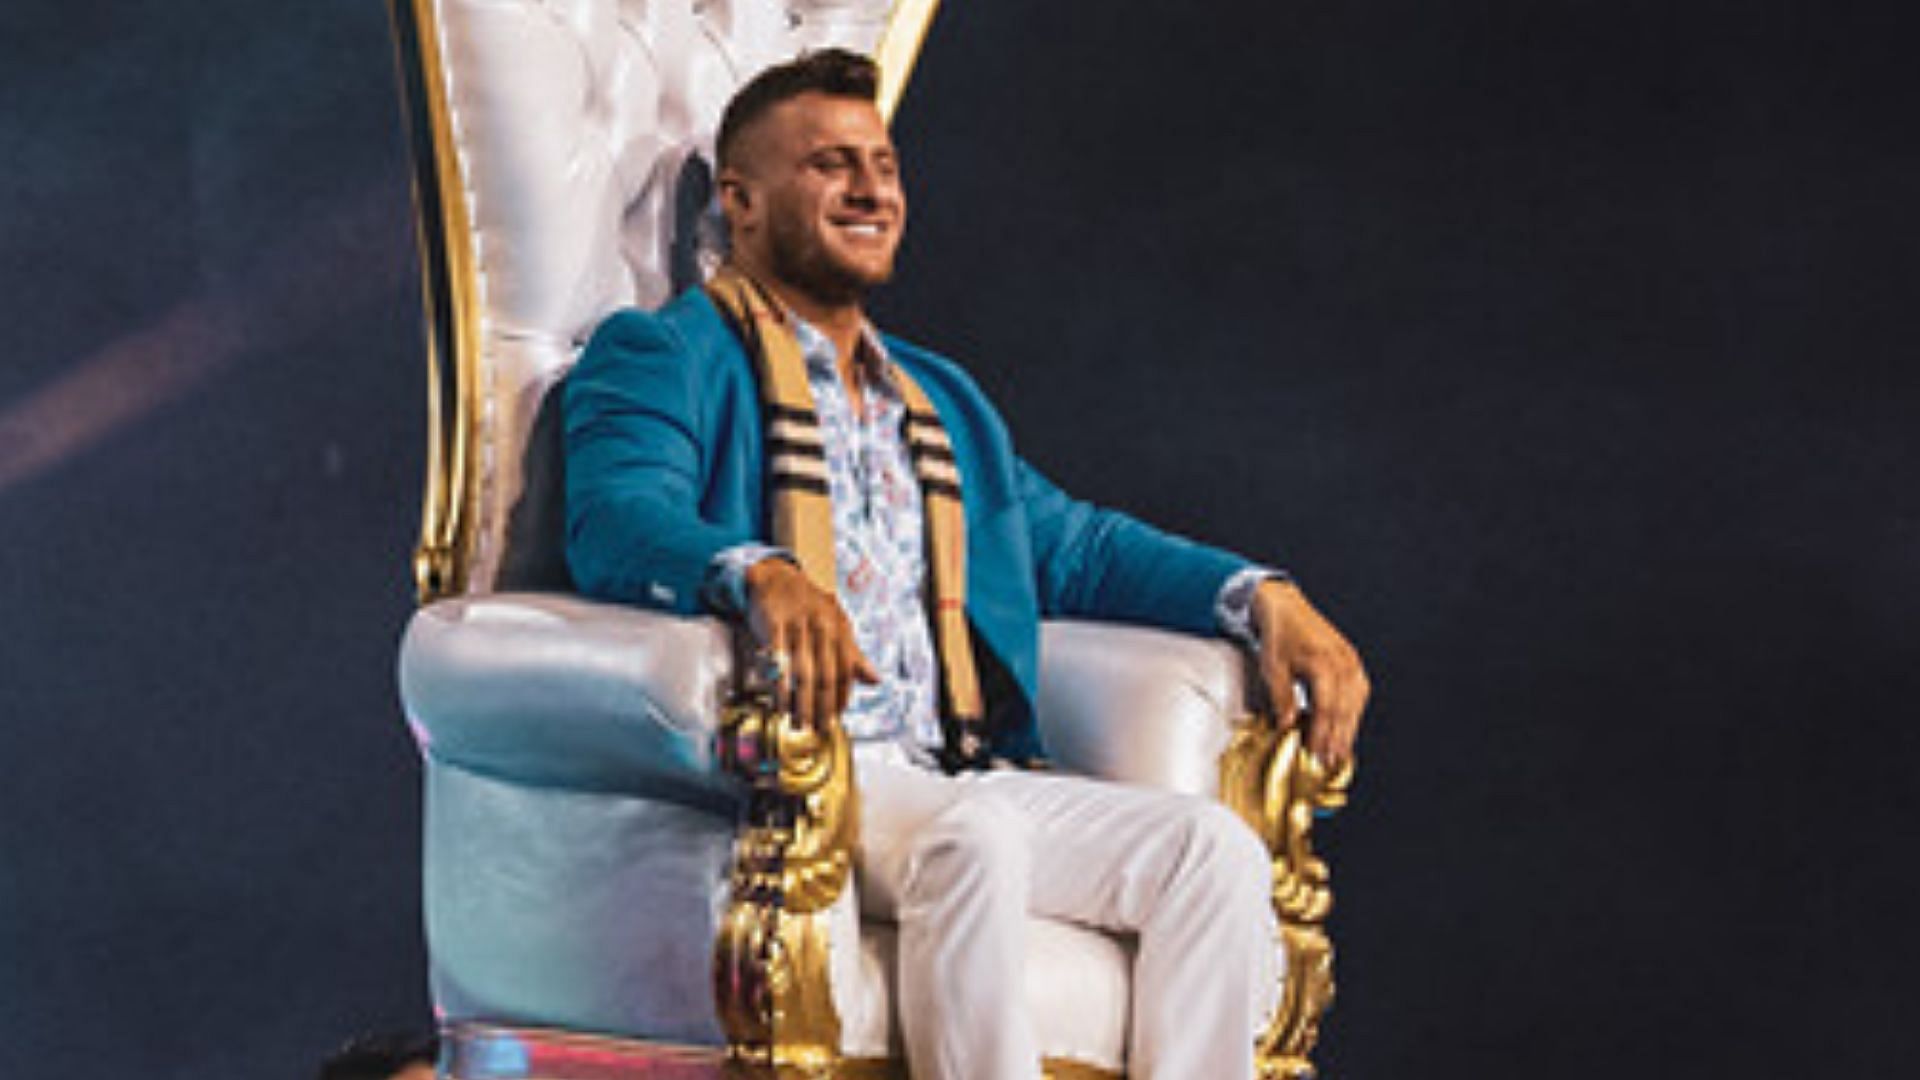 MJF making his entrance at AEW Dynamite in 2022